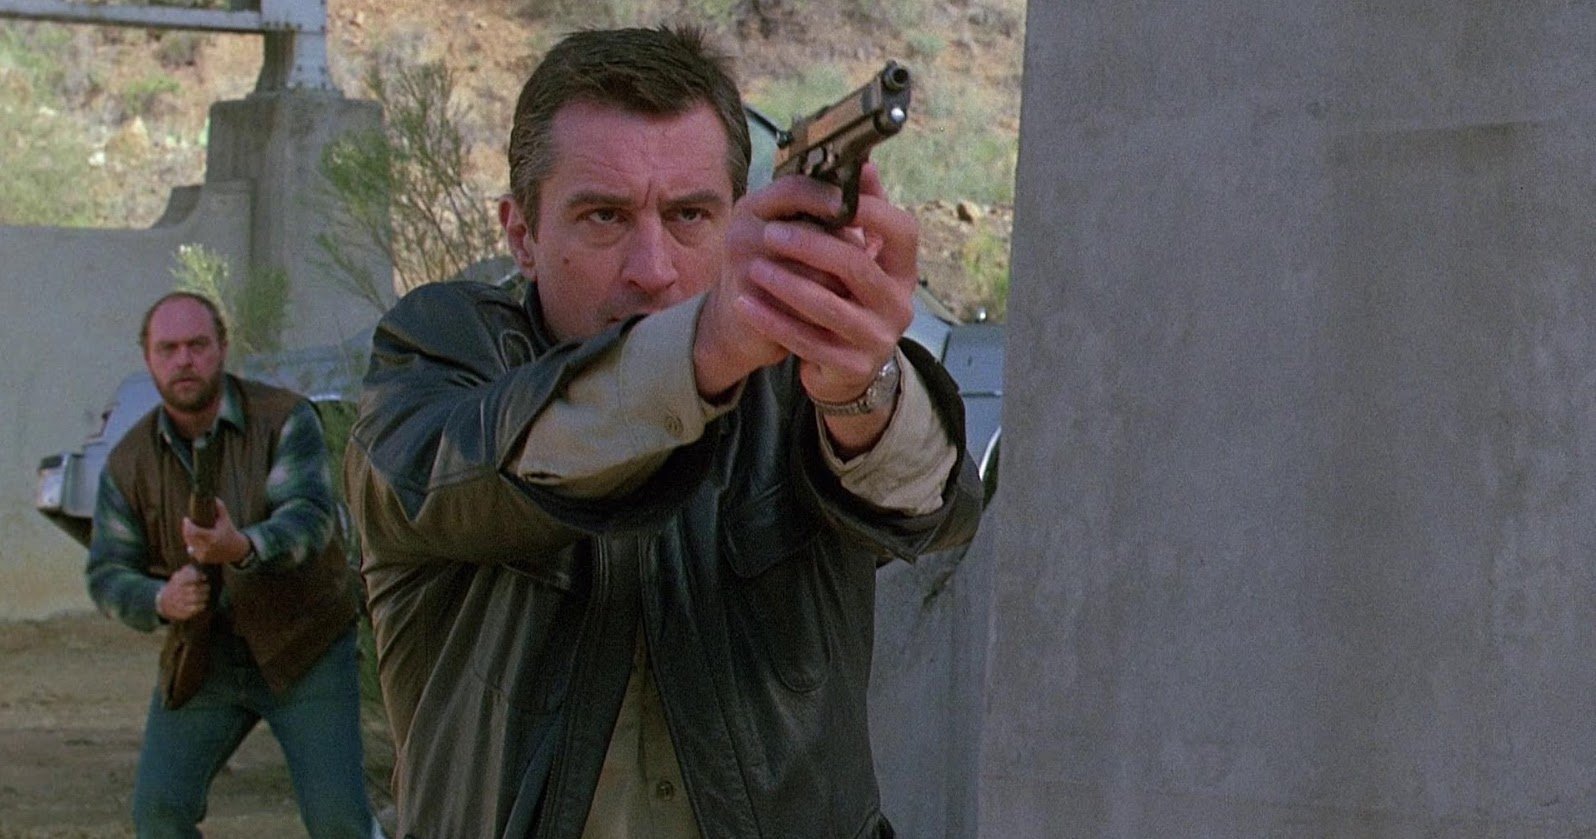 Jack and another character in Midnight Run, brandishing weapons